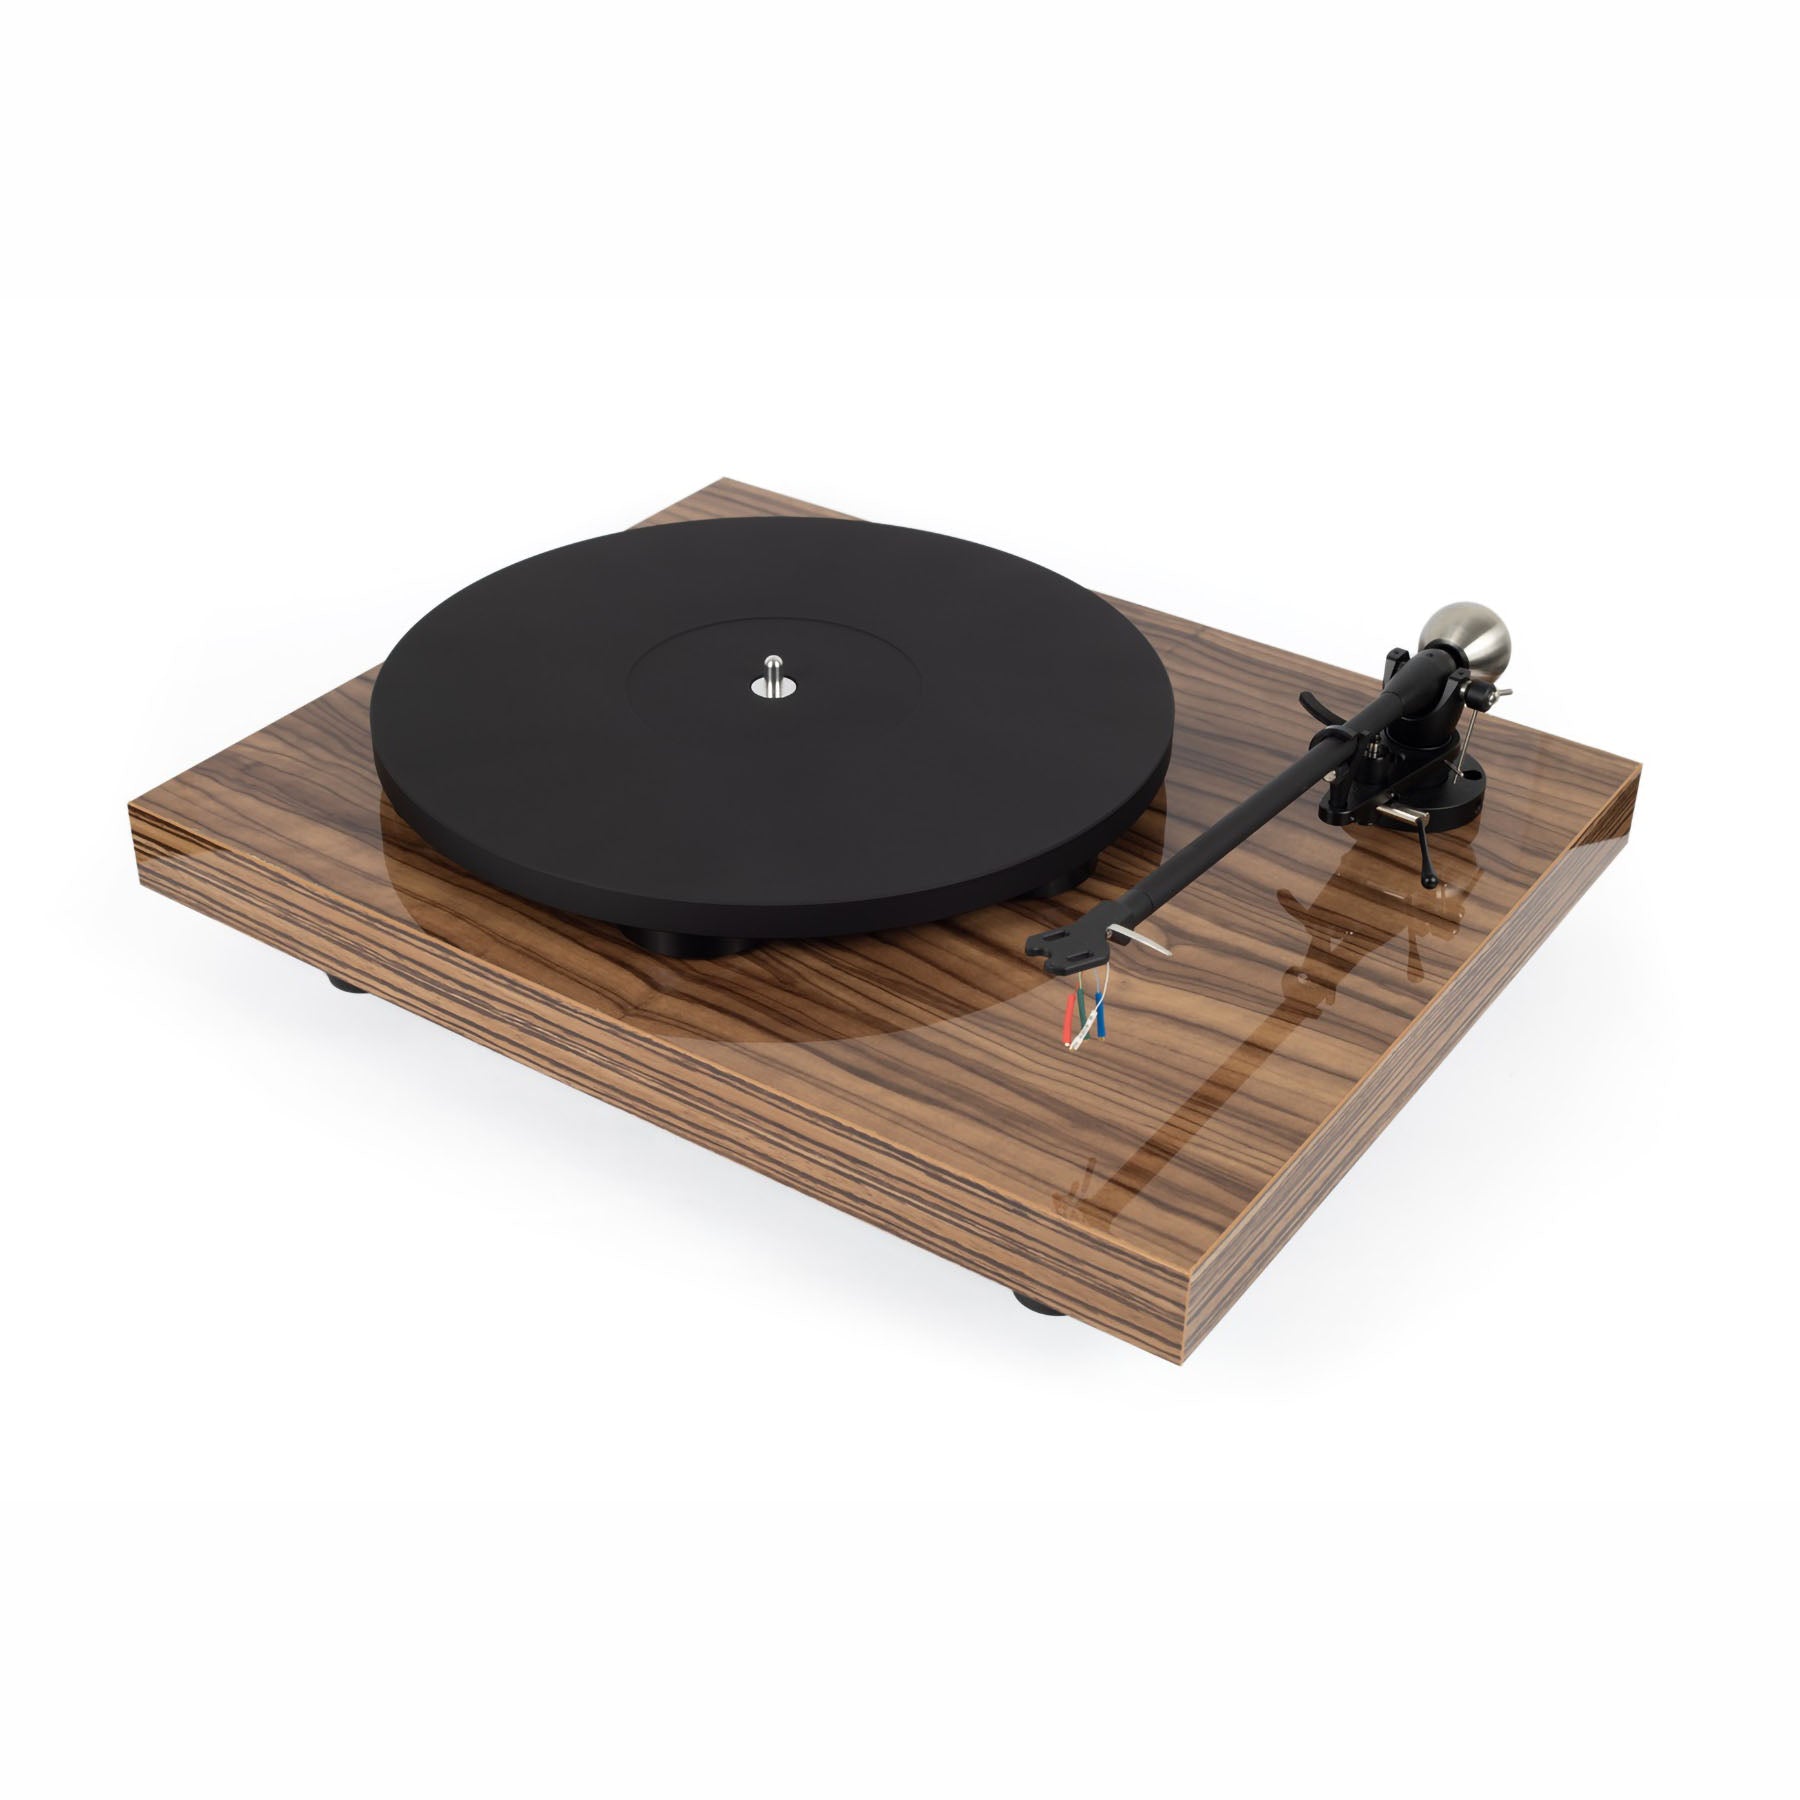 AURIS Classica Turntable with W10 Tonearm